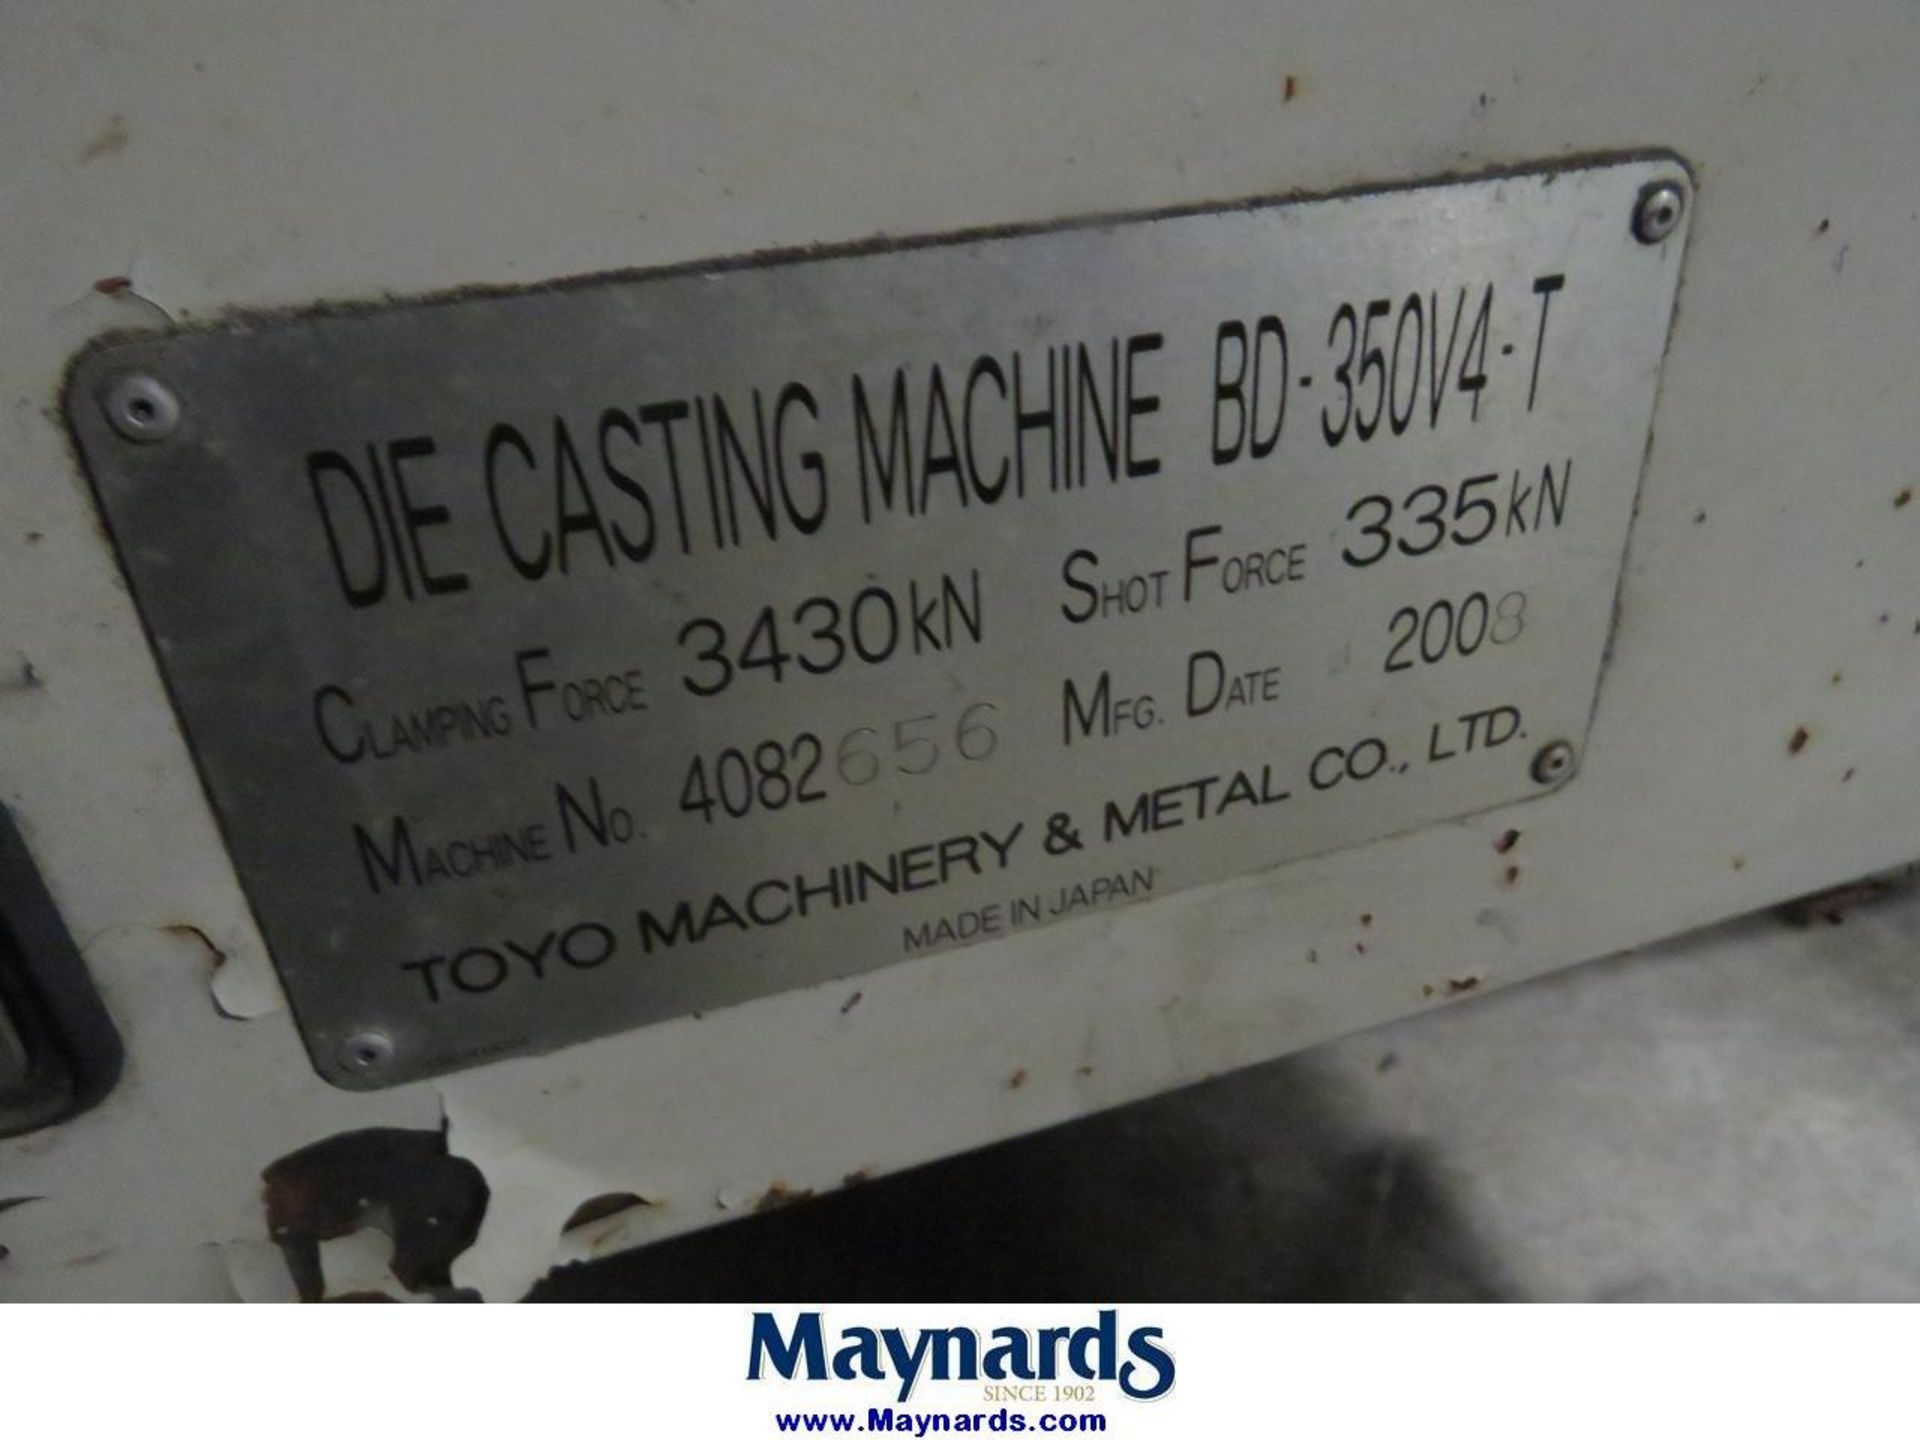 2008 Toyo BD-350V4-T 350 Ton Horizontal Cold Chamber Die Cast Press - Image 4 of 5